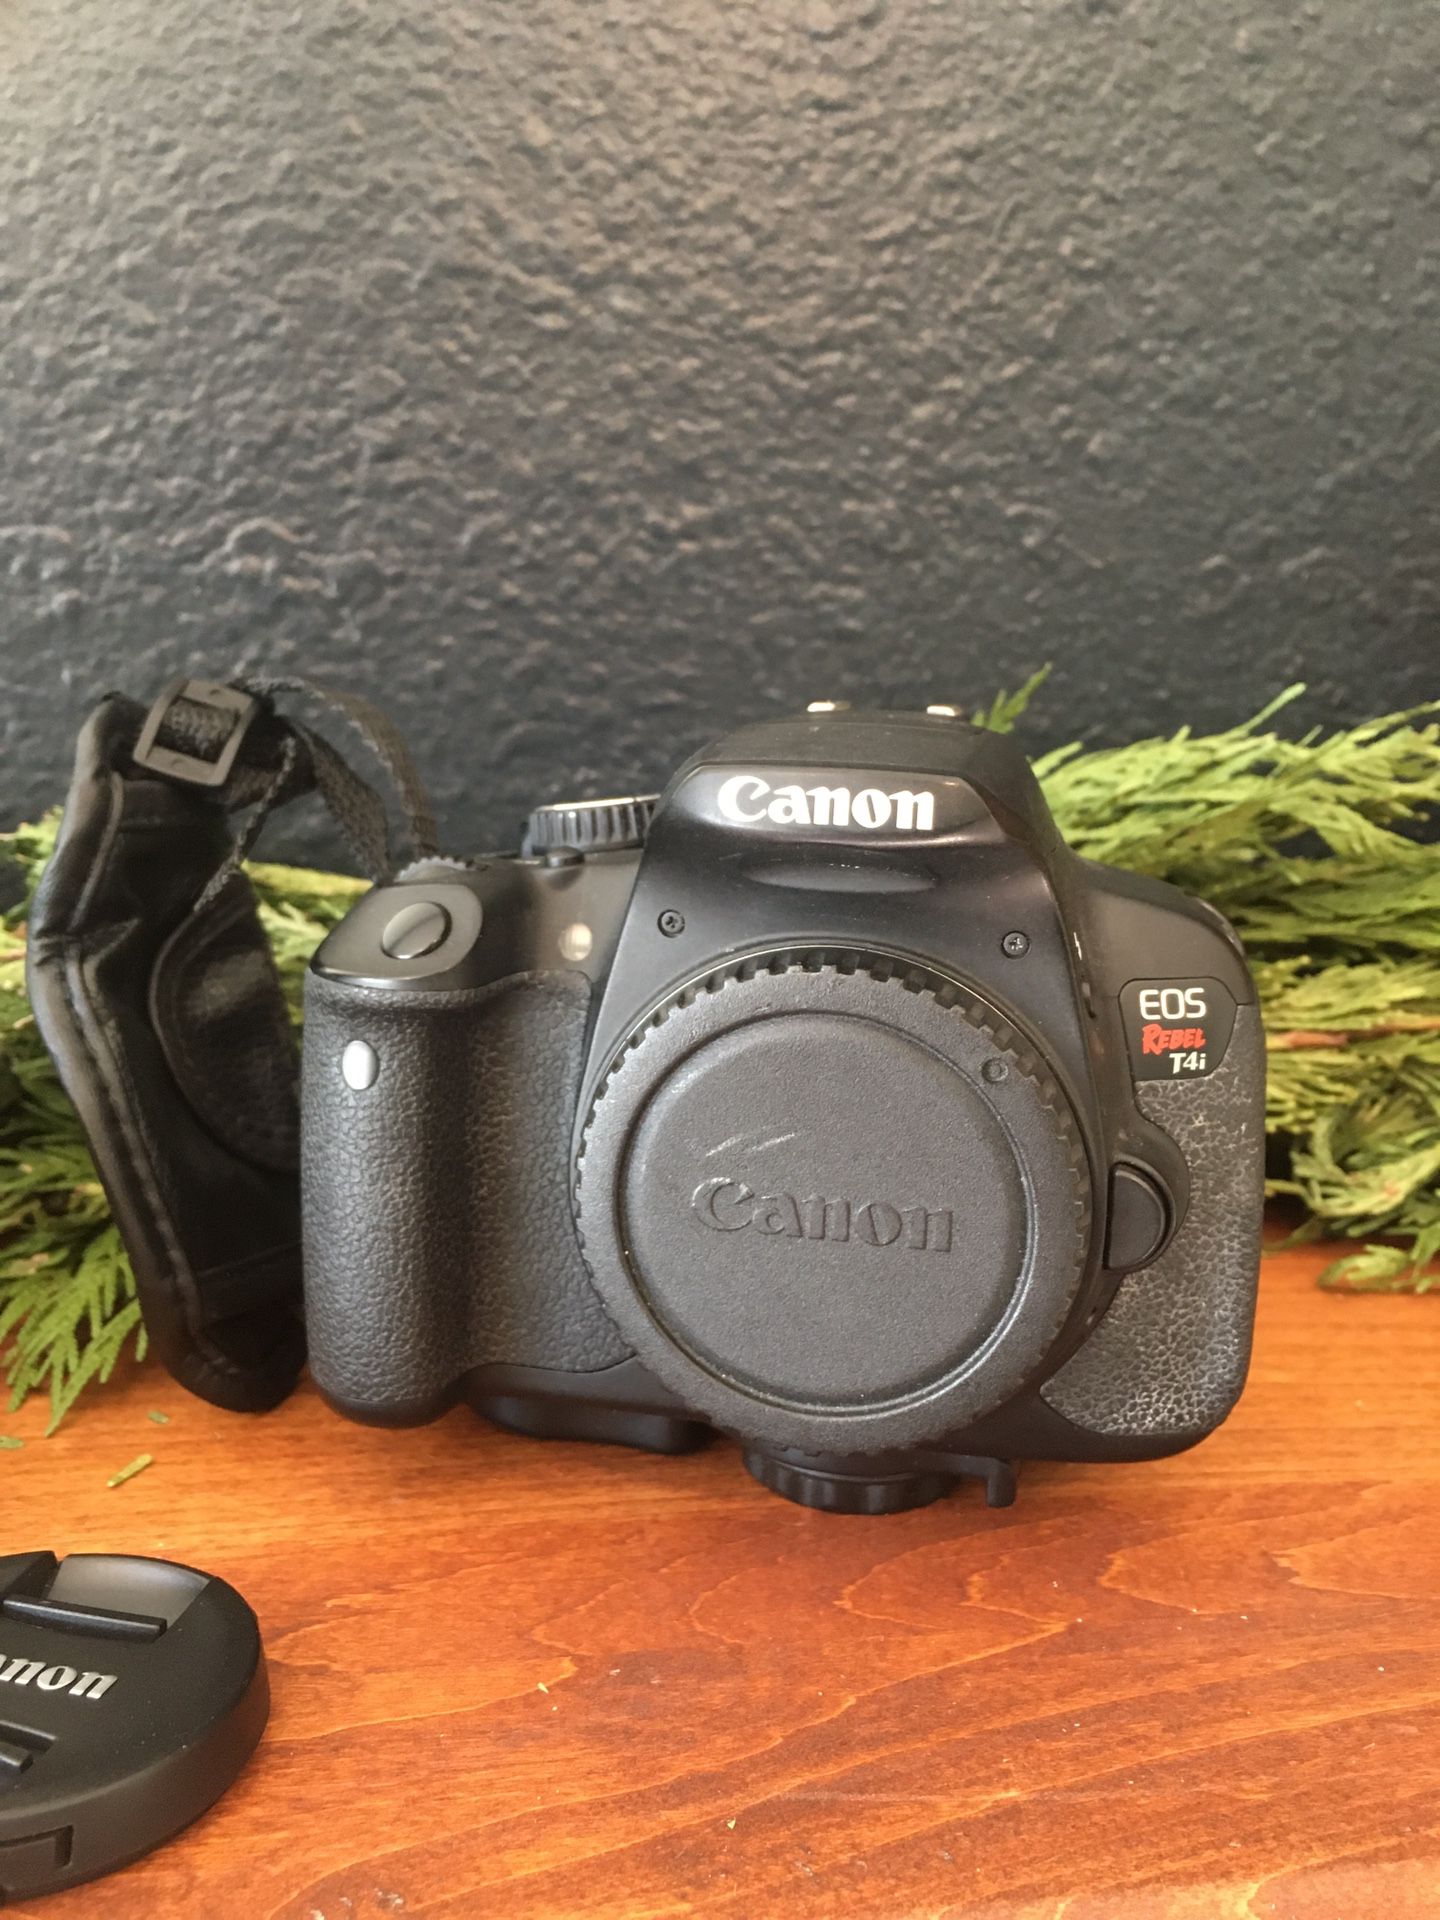 Canon EOS Rebel T4i Camera, Strap, 50mm lens, 18-55mm lens, Camera Bag, and Charger — PRICE REDUCED!